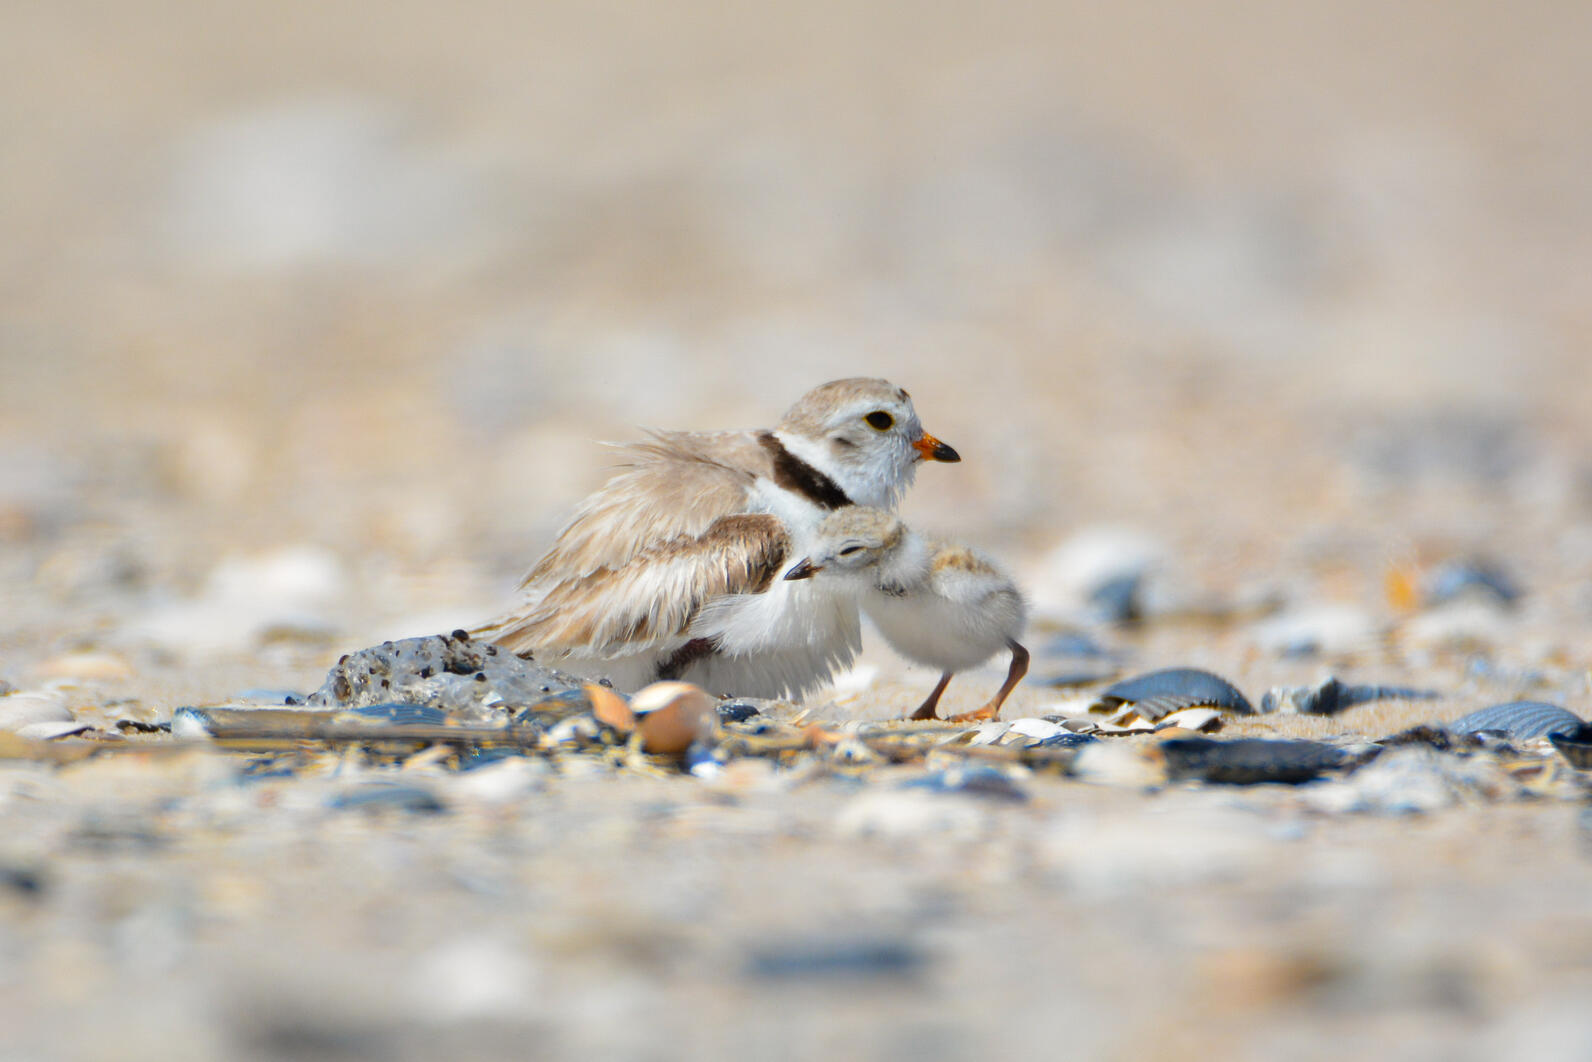 A Piping Plover chick stands next to its parent on the beach.